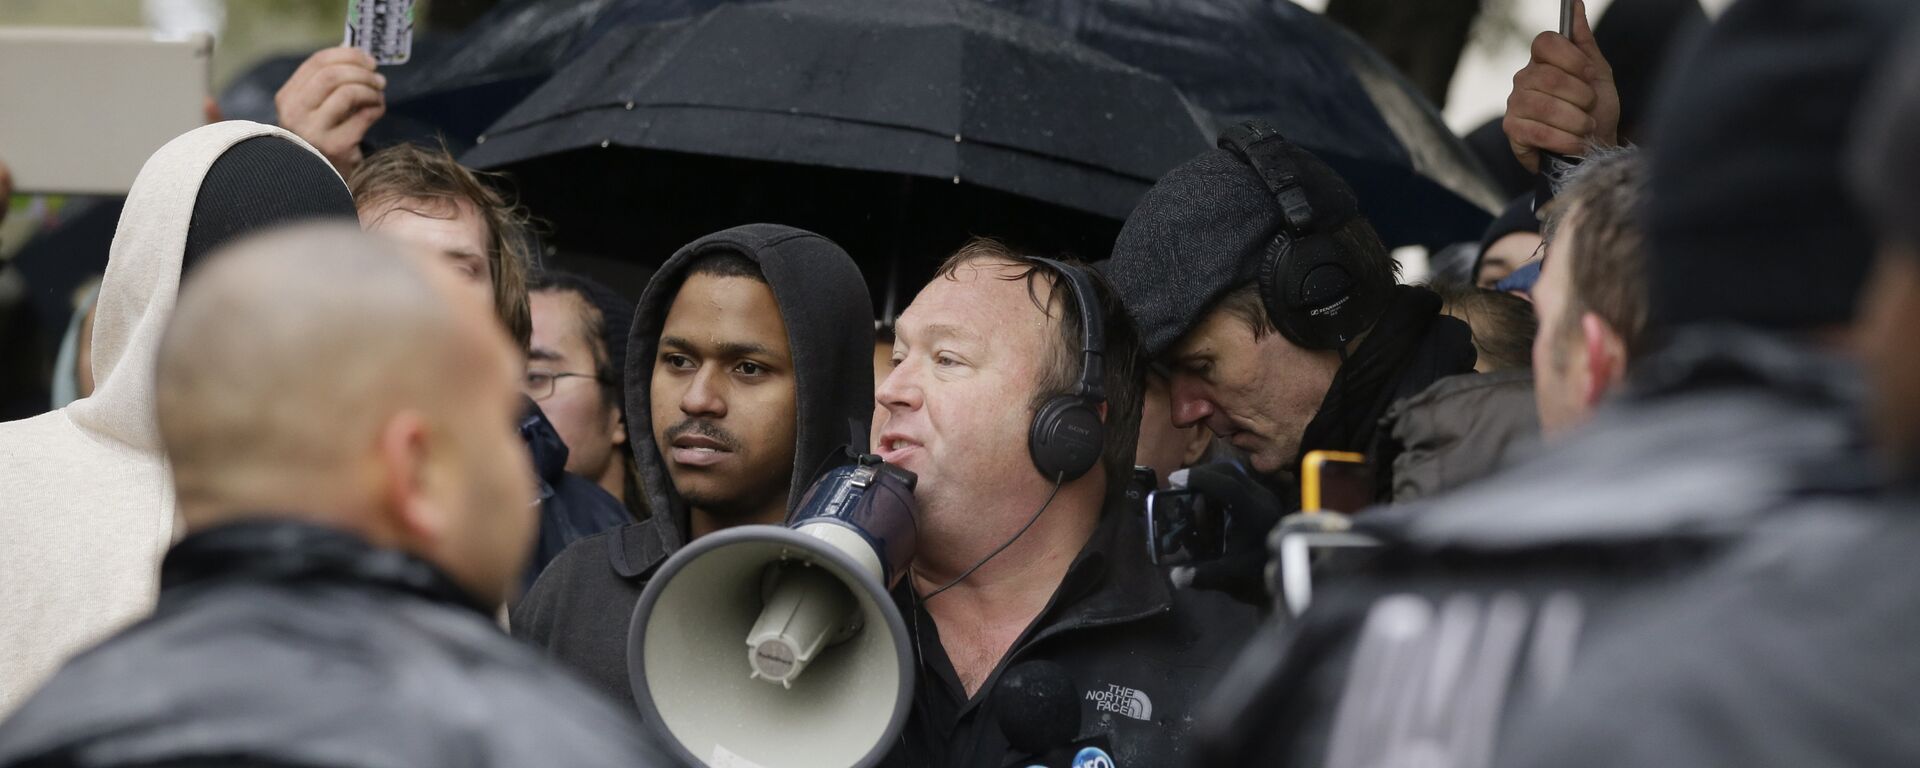 Talk show host Alex Jones (C) leads a protest after a ceremony to mark the 50th anniversary of the assassination of John F. Kennedy, Friday, Nov. 22, 2013, at Dealey Plaza in Dallas - Sputnik International, 1920, 30.03.2019